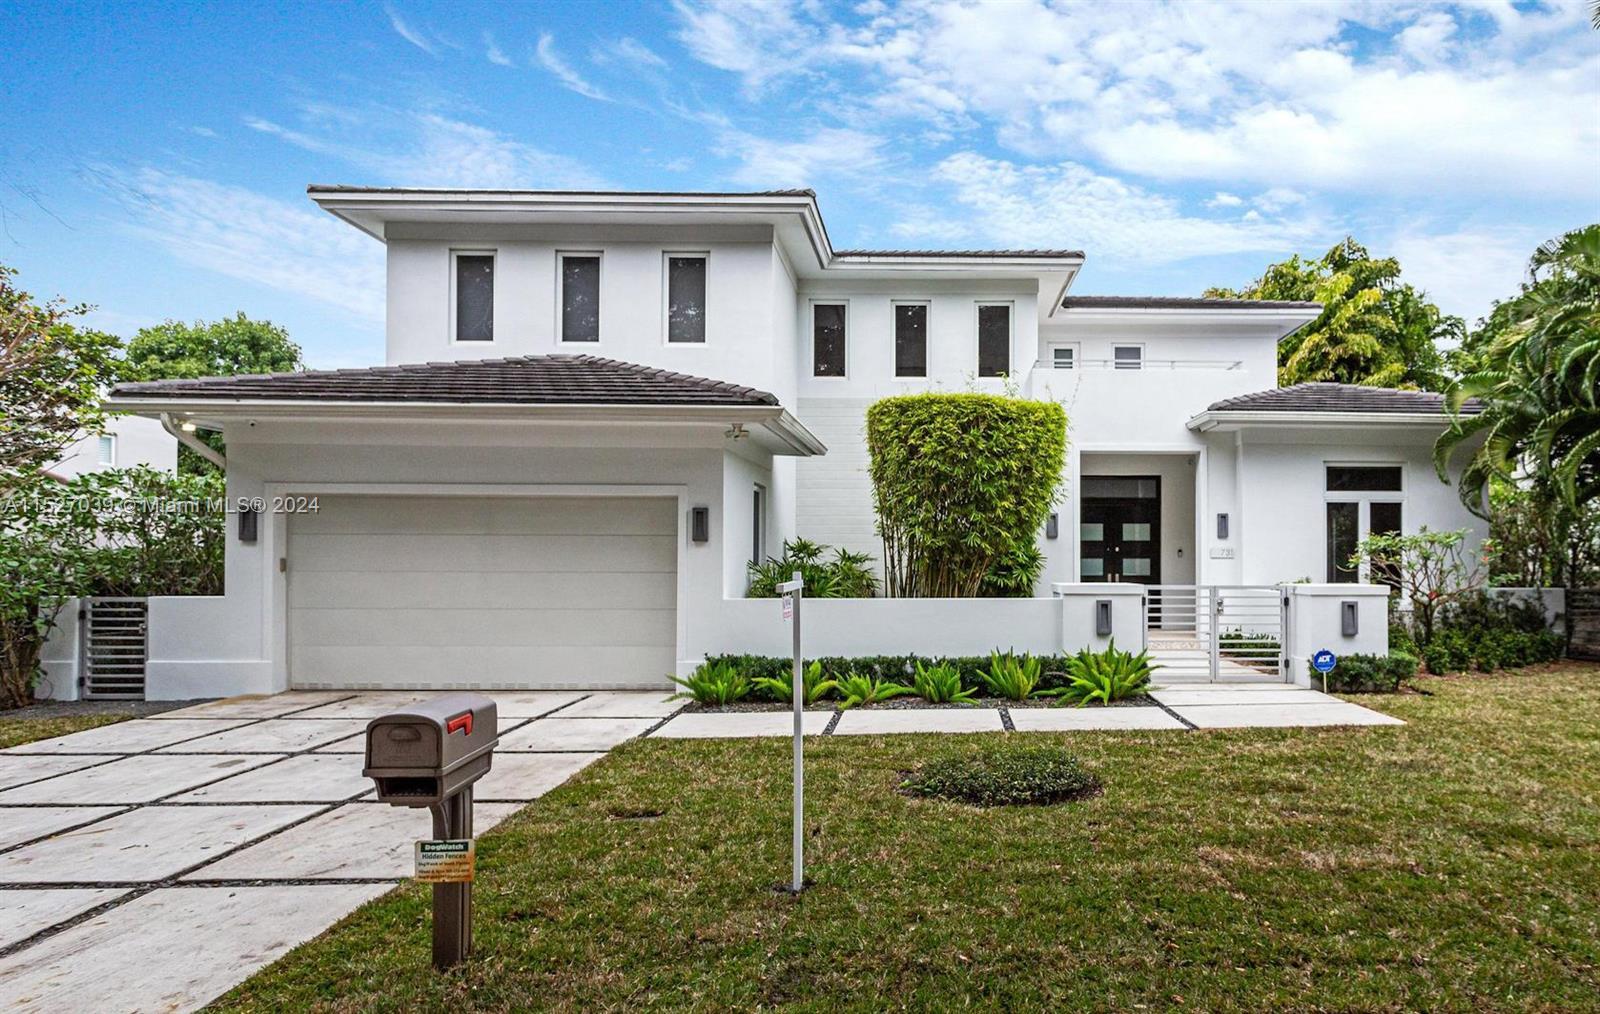 Photo of 731 Escobar Ave in Coral Gables, FL